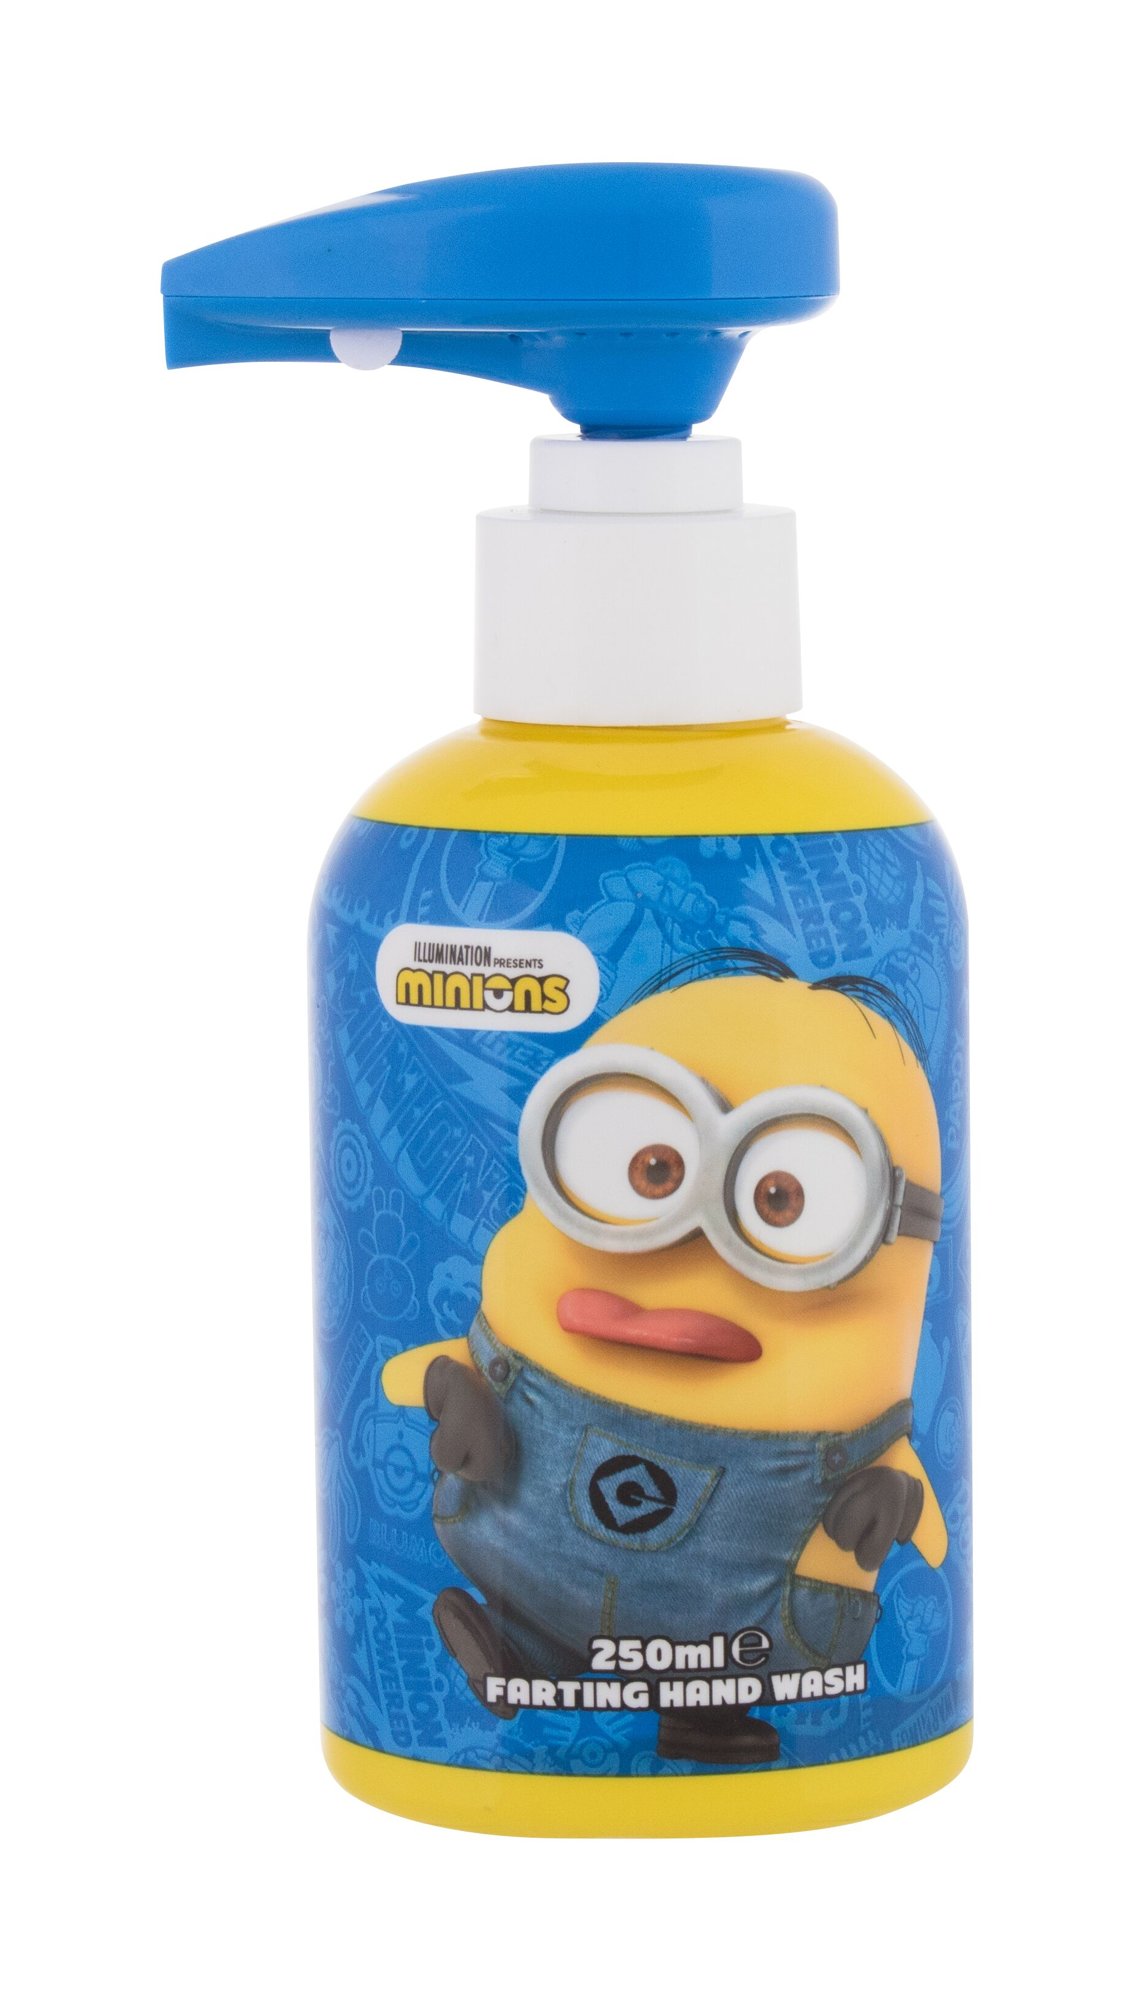 Minions Hand Wash With Fart Sounds skystas muilas